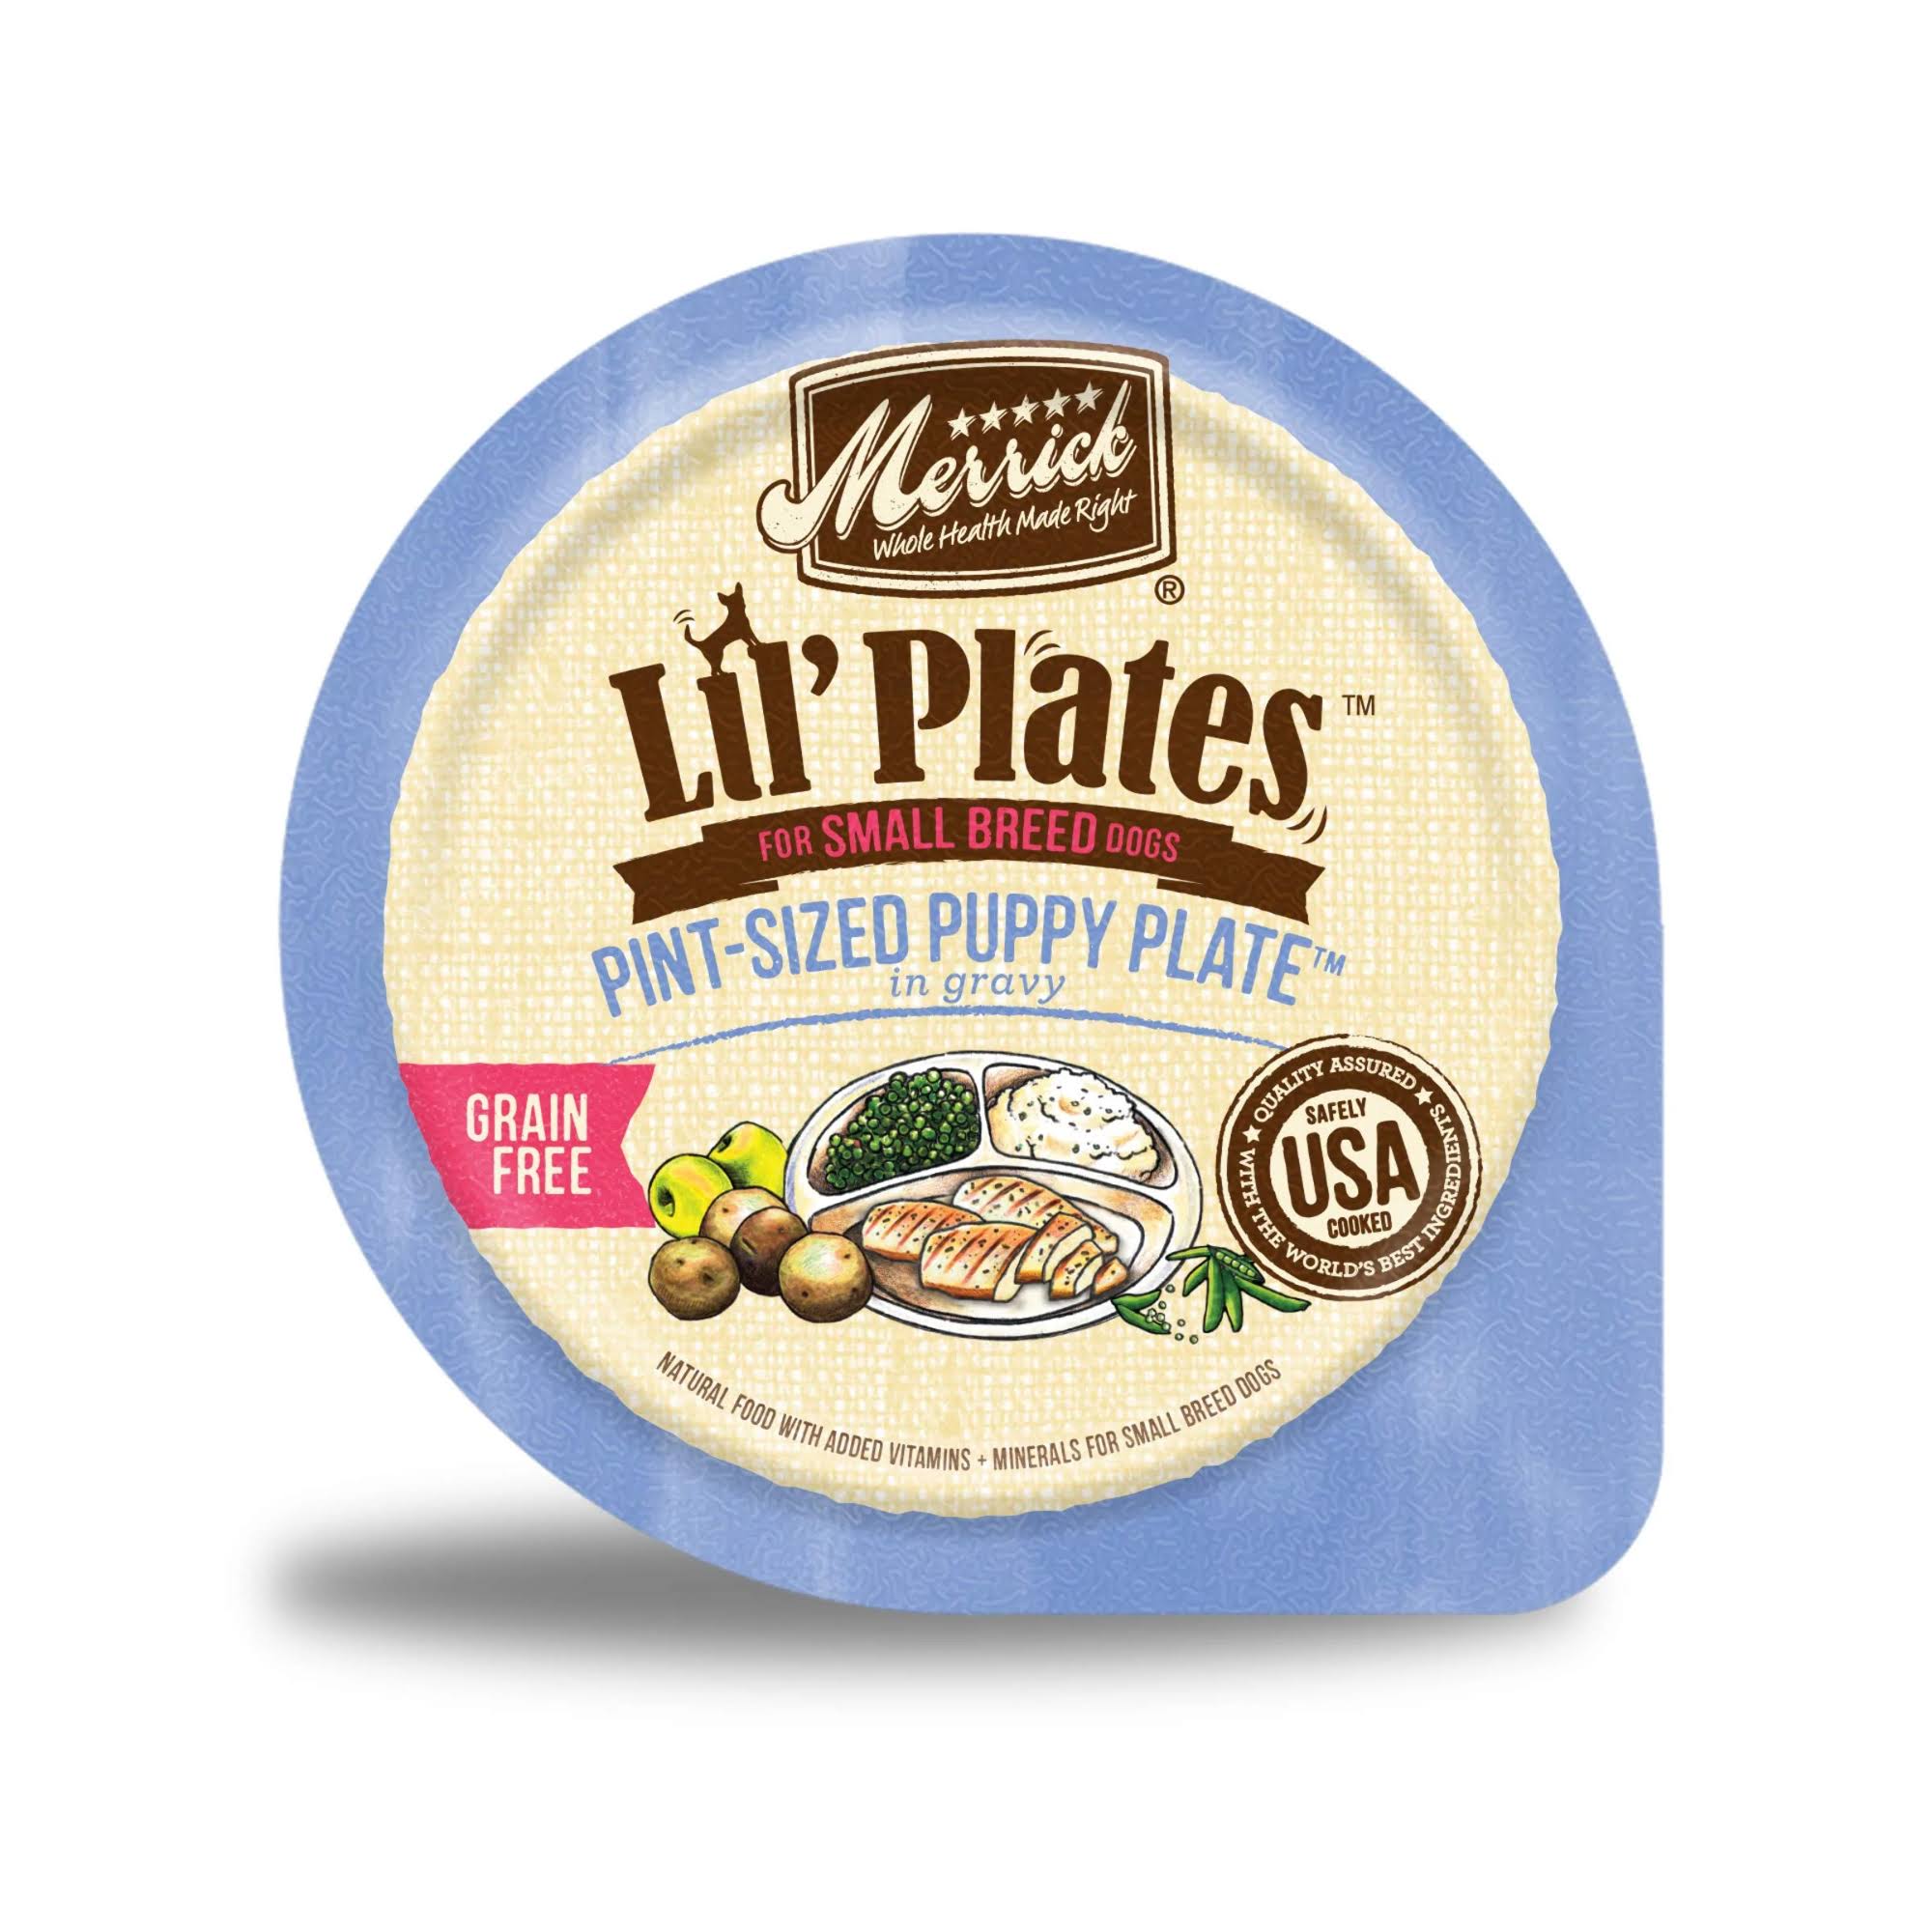 Merrick Lil' Plates Small Breed Pint-sized Puppy Plate in Gravy Grain-Free Wet Dog Food